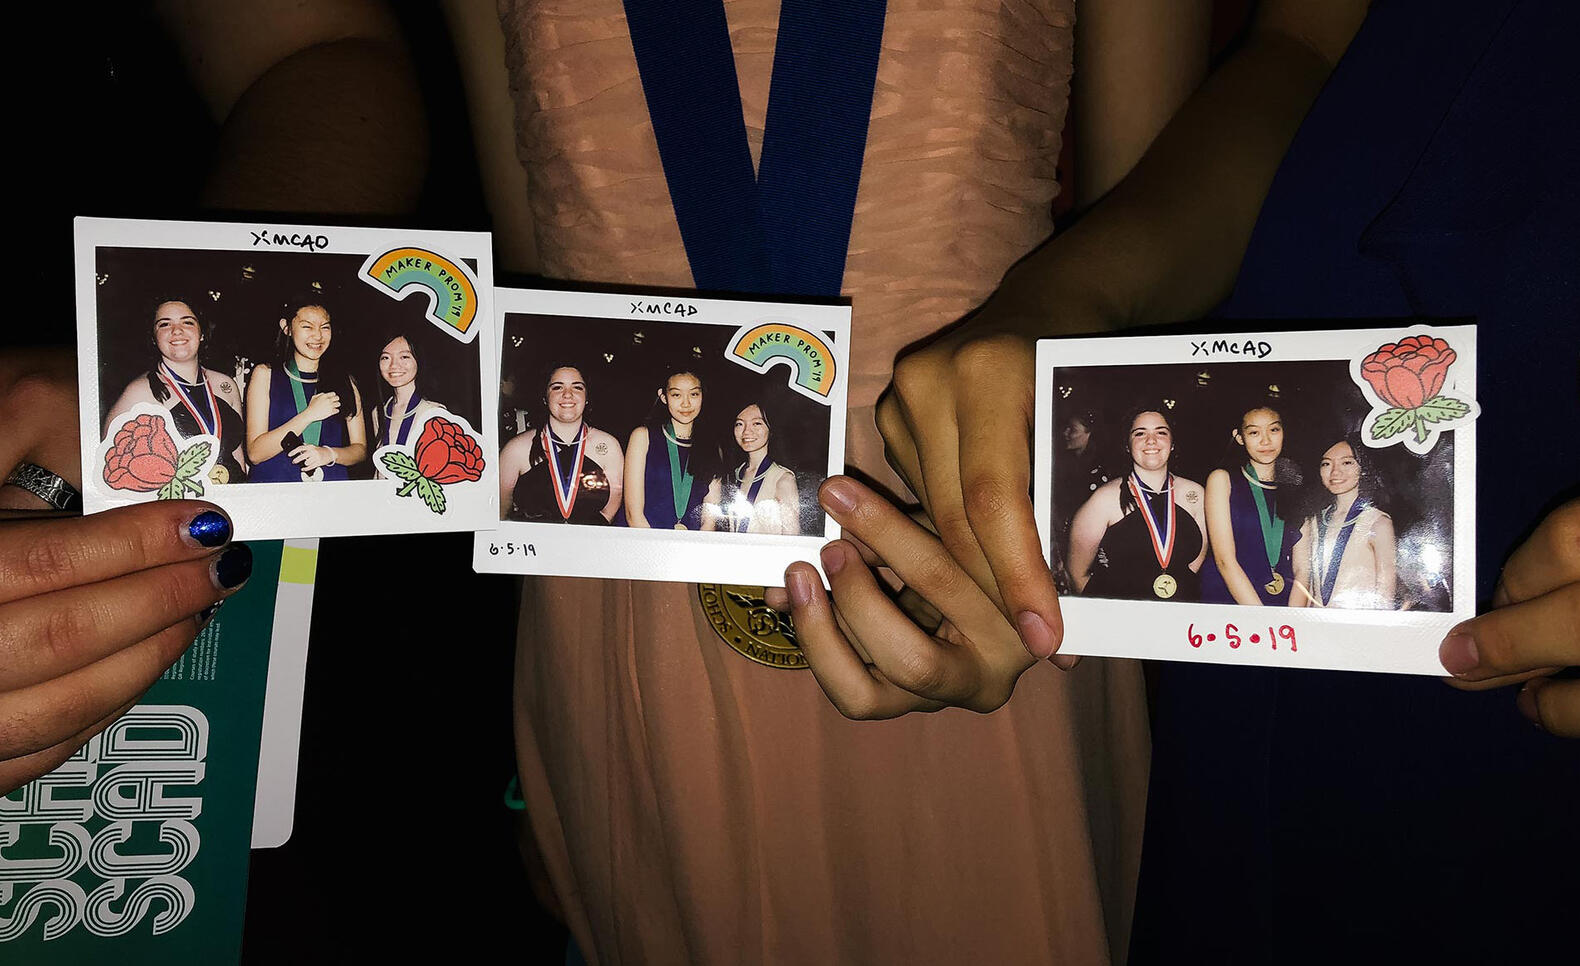 Prospective students showing off their Polaroids at the AICAD Maker Prom. Photo by Forrest Wasko.